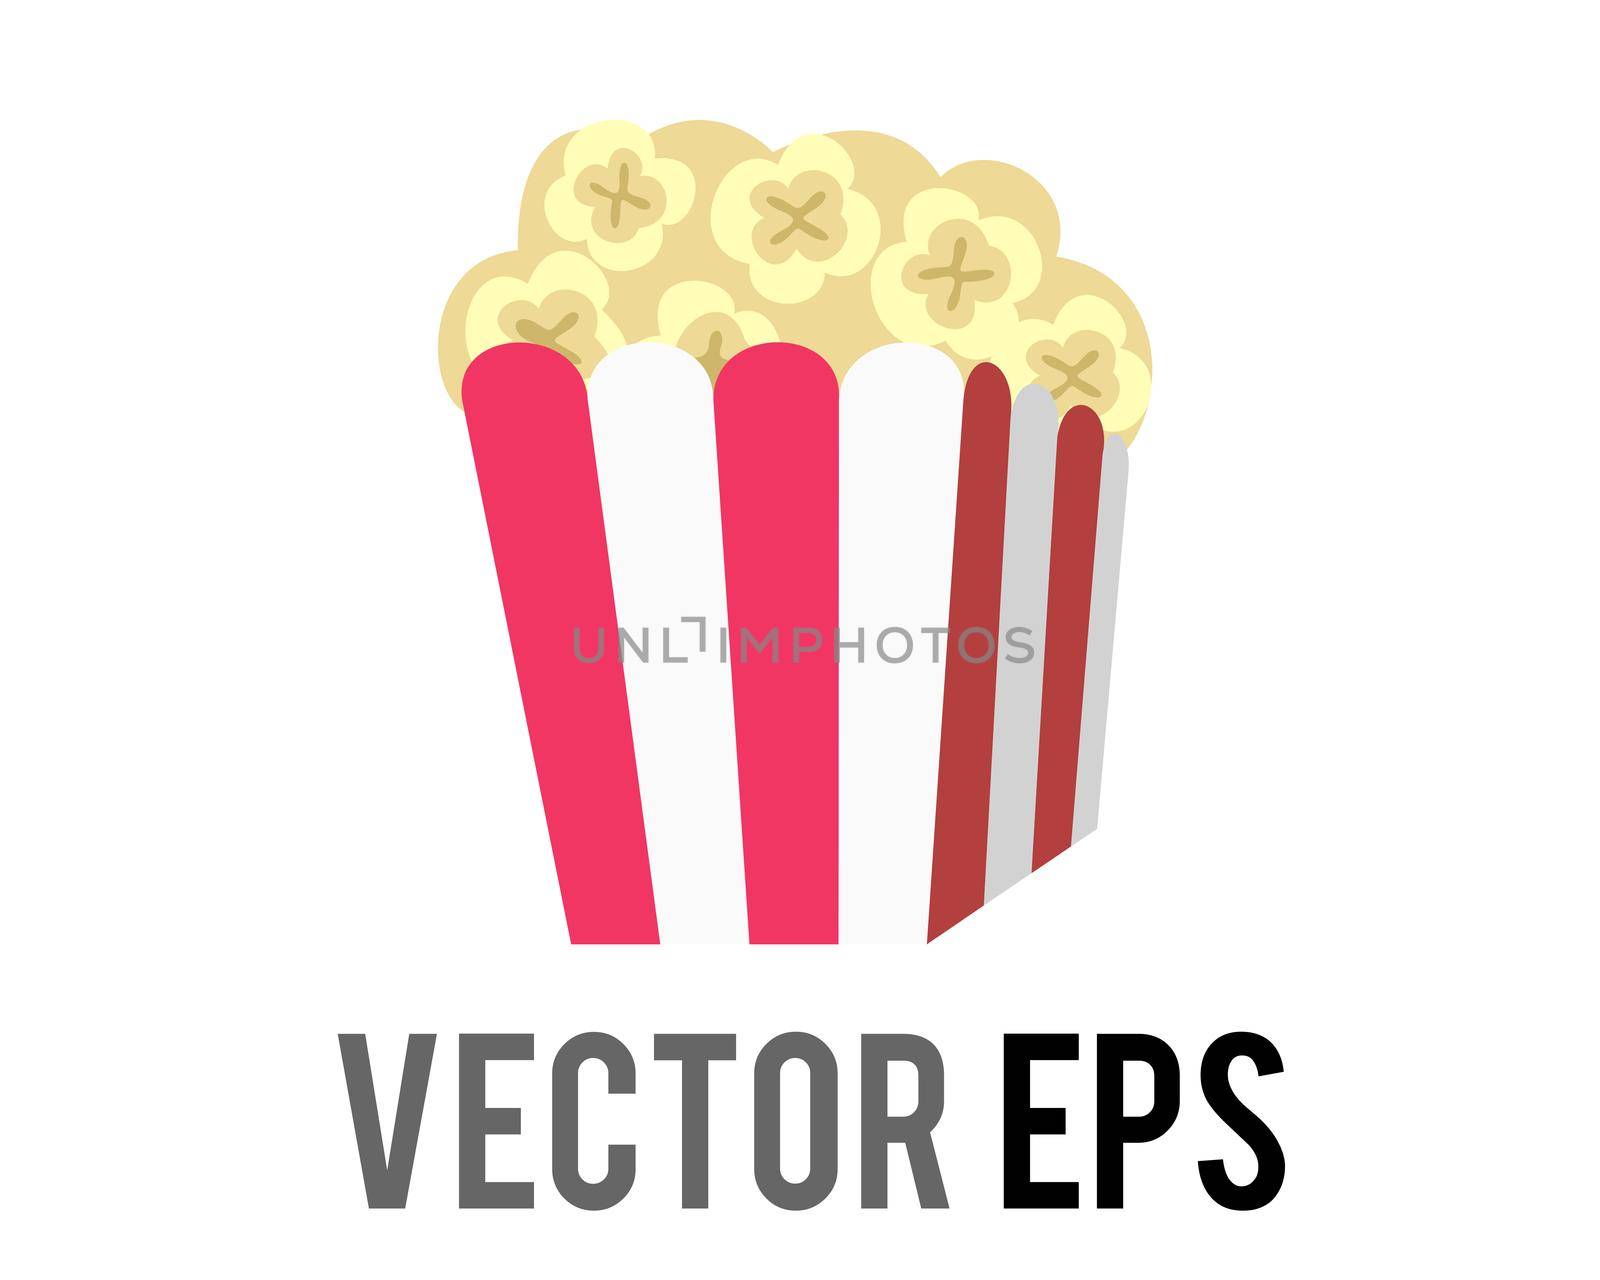 Vector sweet butter pop corn junk food icon with red, white classic paper cup box by cougarsan